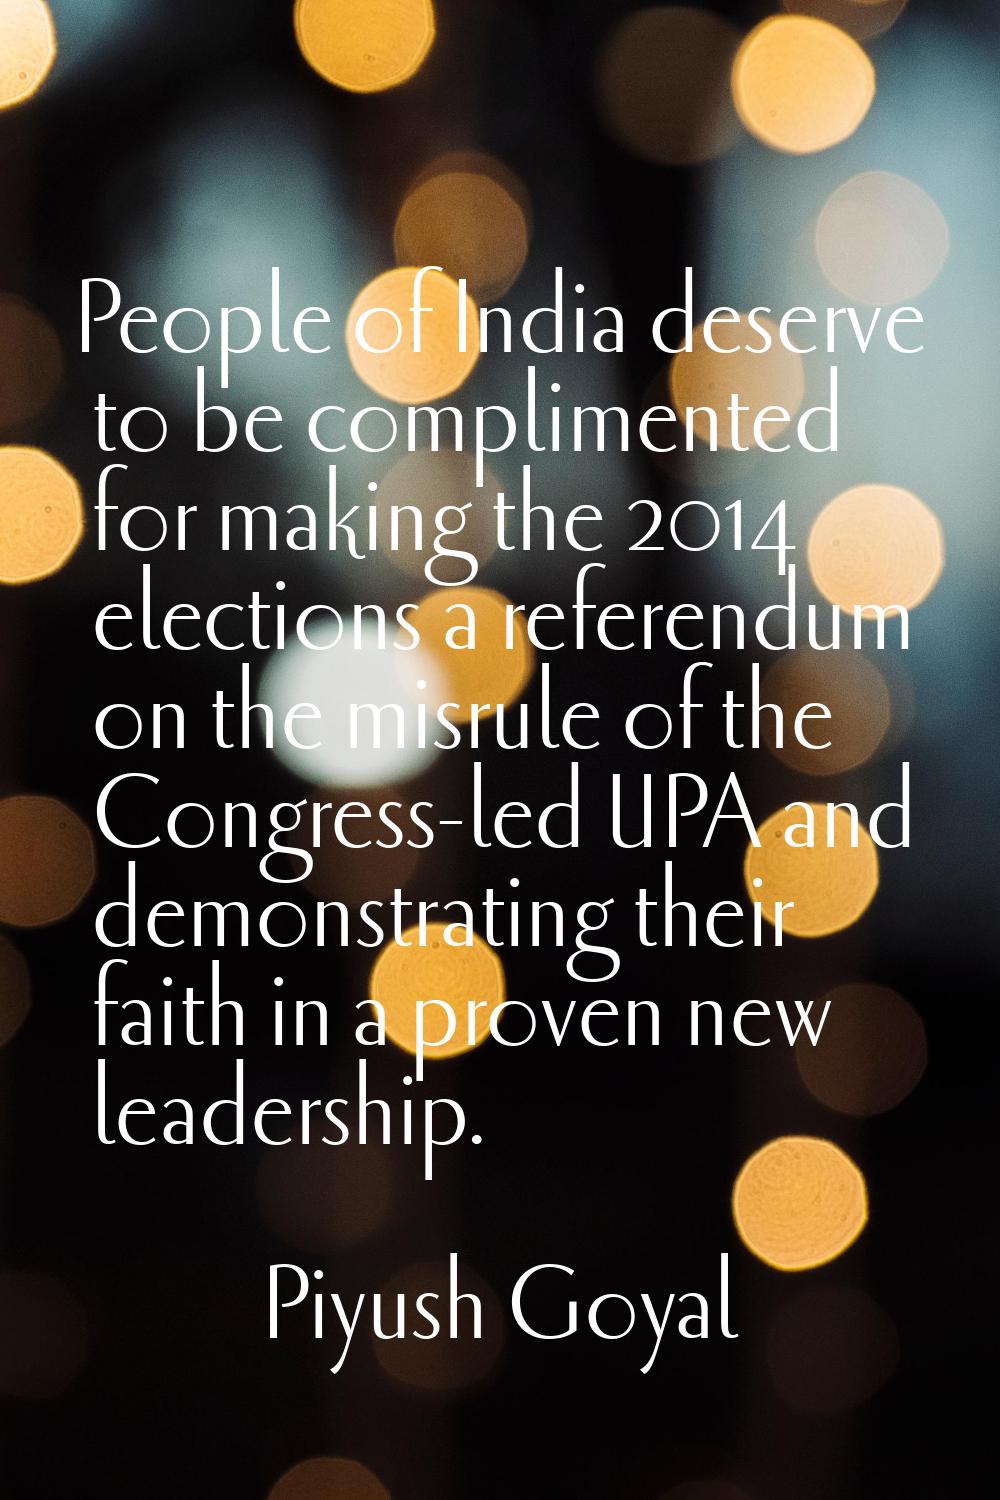 People of India deserve to be complimented for making the 2014 elections a referendum on the misrul